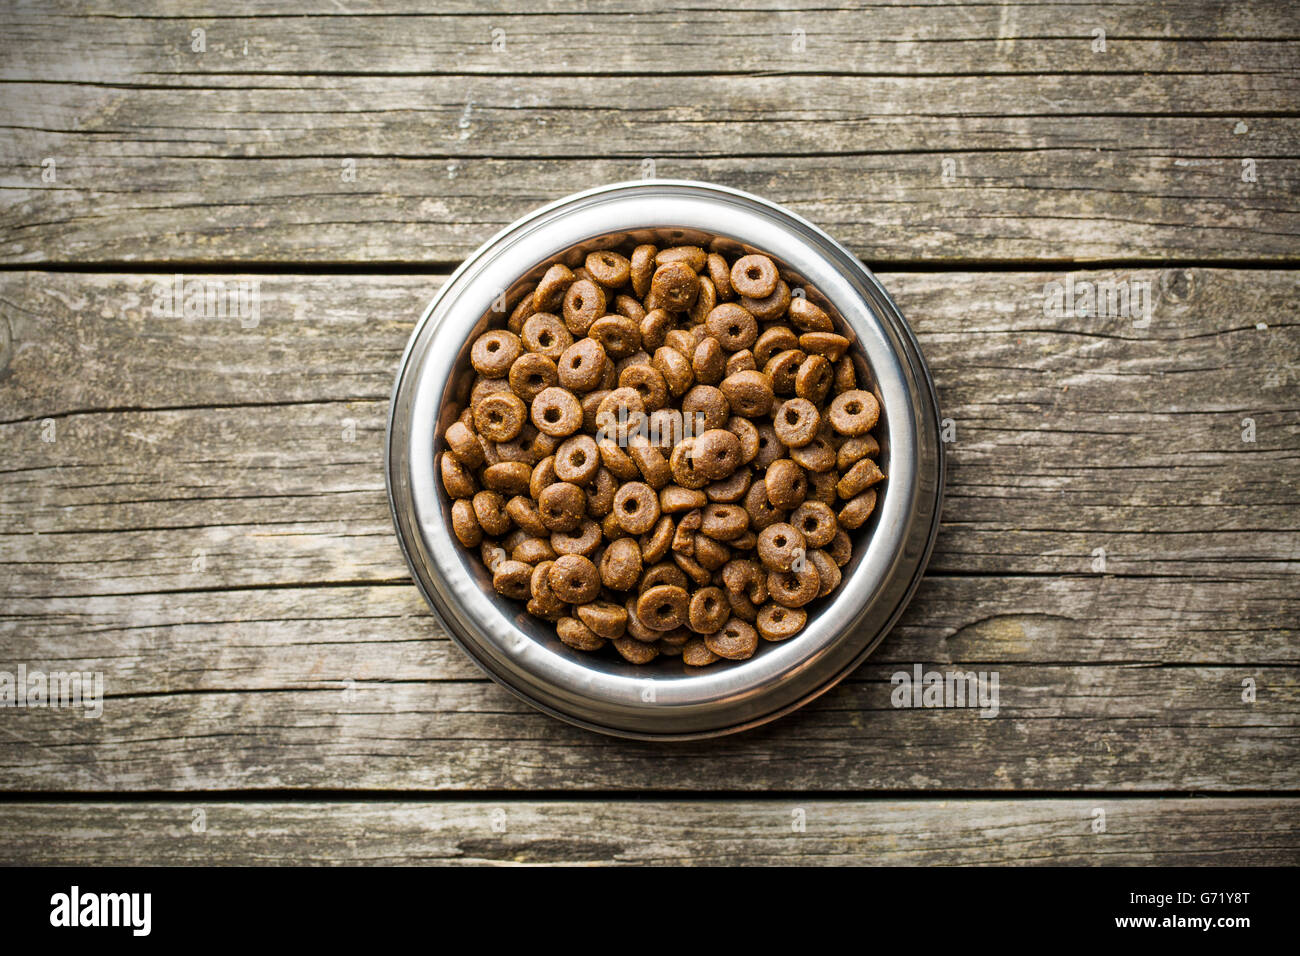 Dry kibble dog food in bowl on old wooden table. Top view. Stock Photo